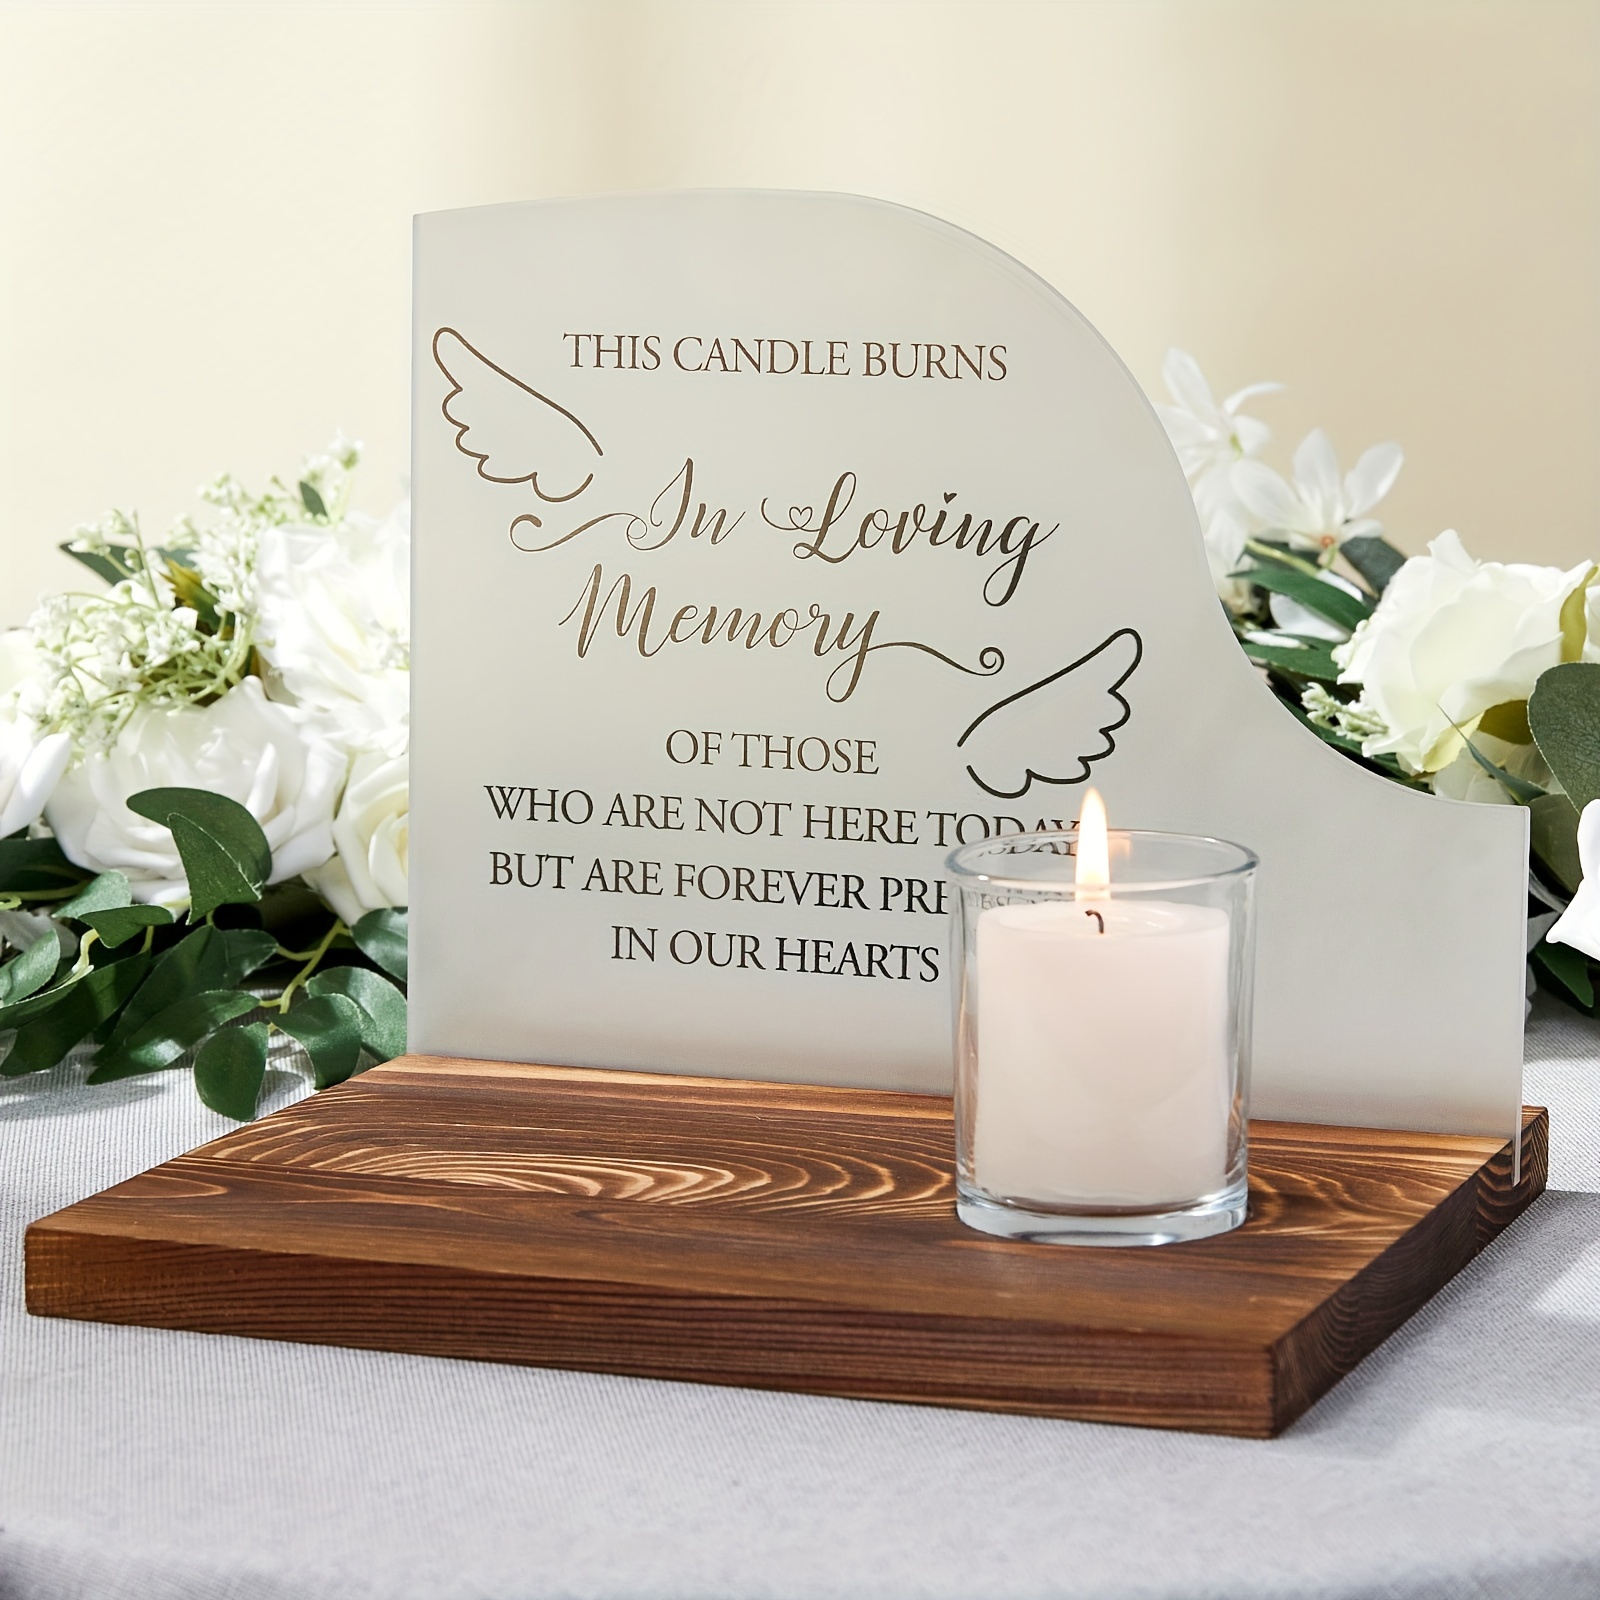 

Aw Bridal Sympathy Gifts Memorial Signs Acrylic & Wooden In Loving Memory Wedding Signs, Wedding Memorial Sign For Loss Of Loved 1 Mother Father, Memorial Gifts Bereavement Gifts